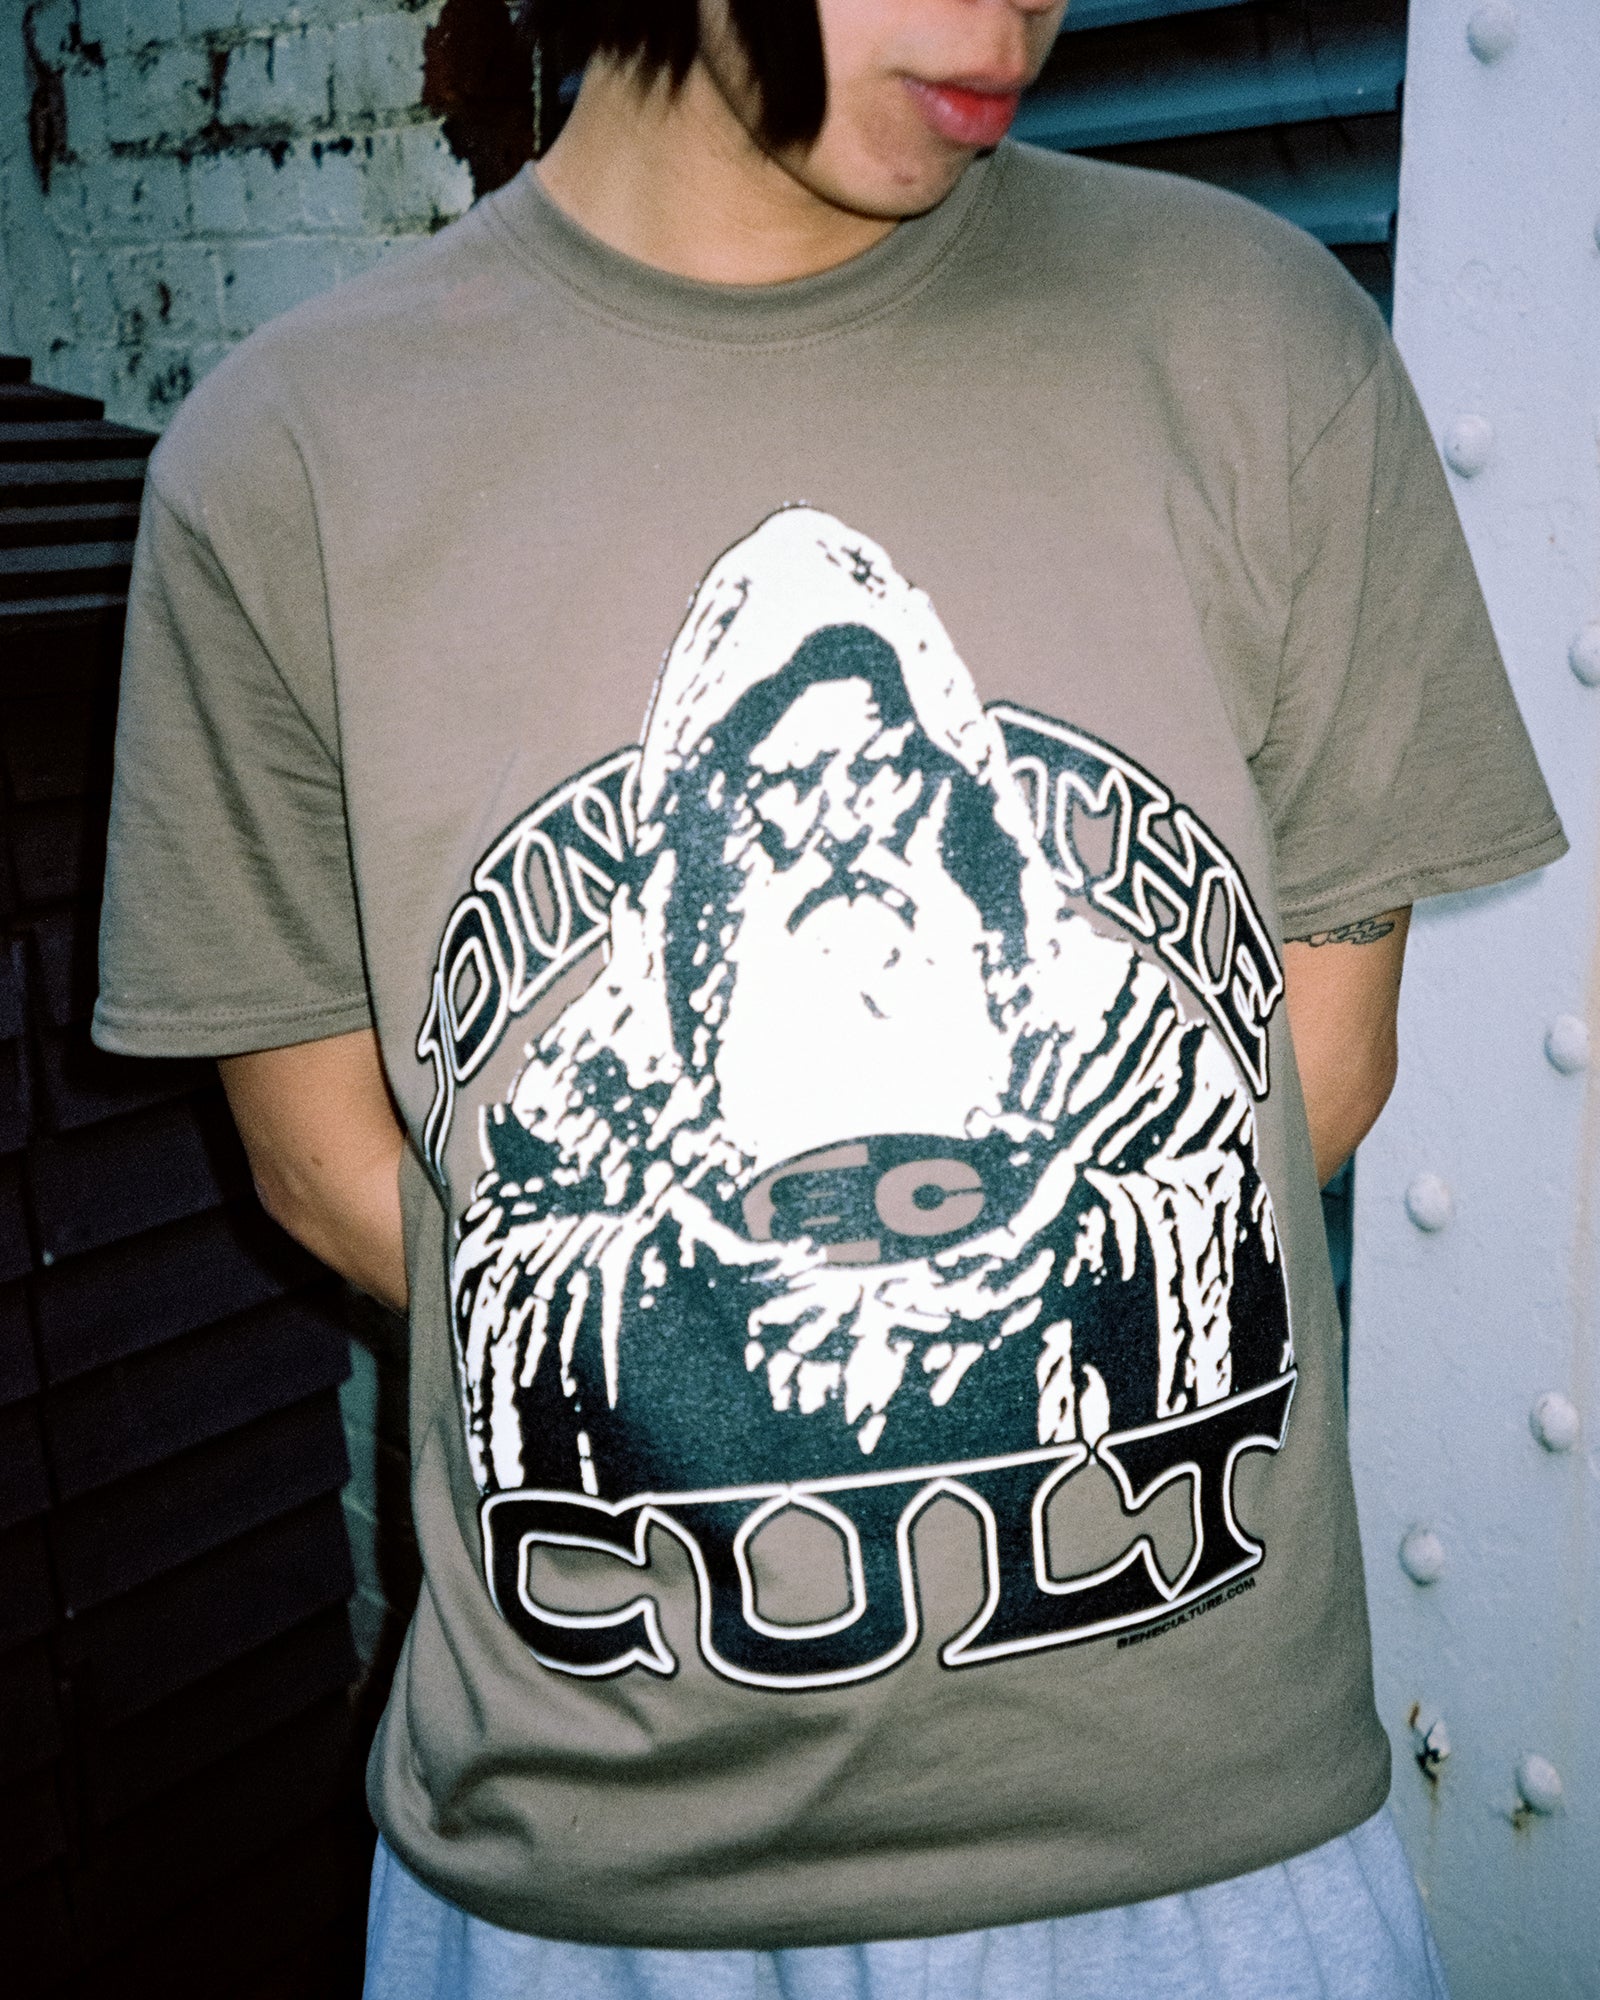 Join the Cult T-Shirt (Brown)